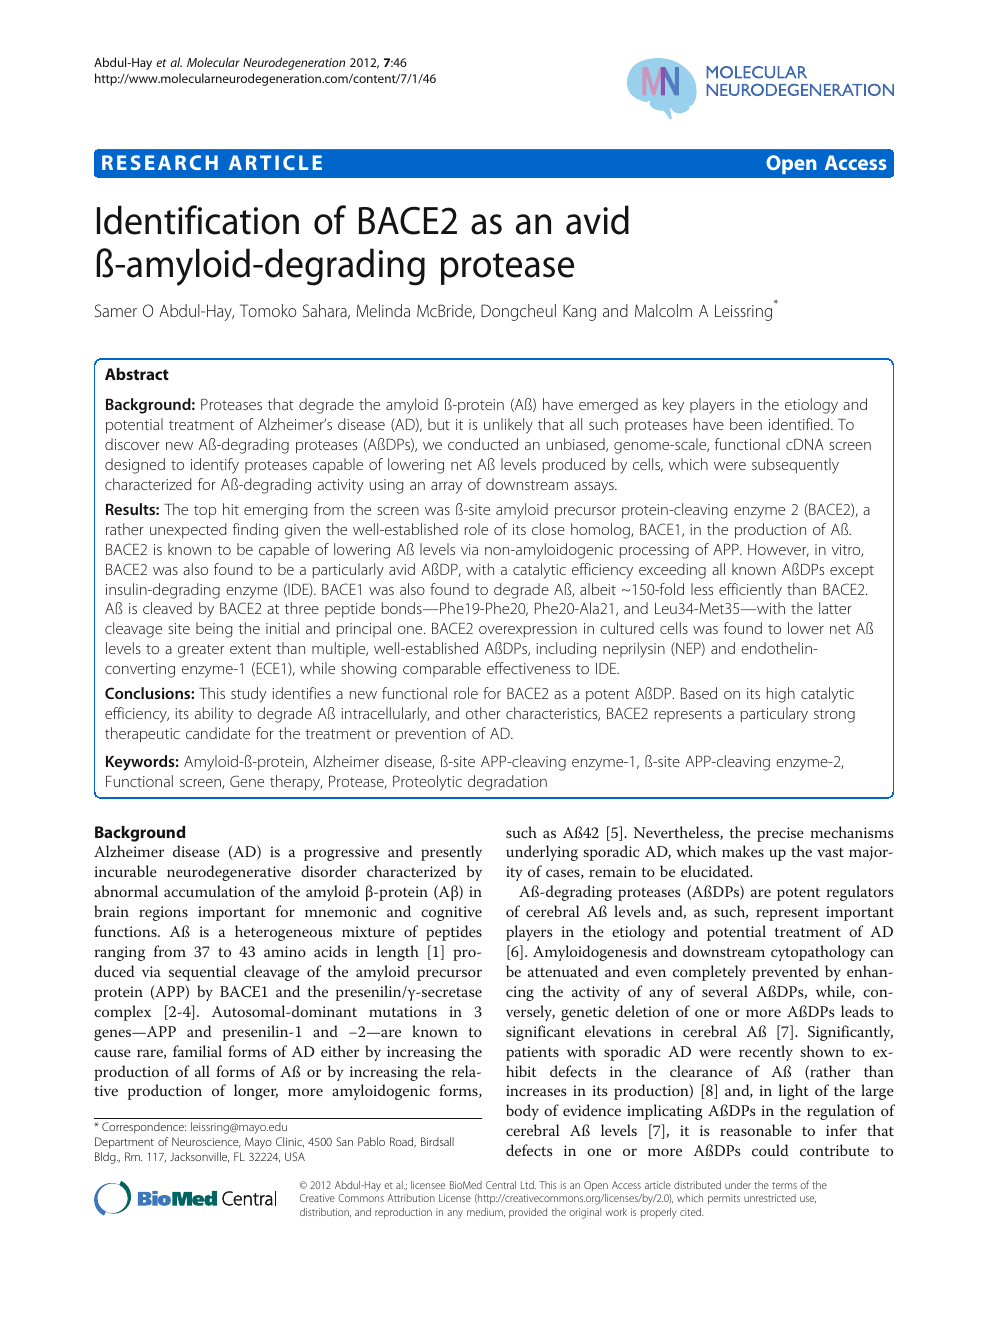 Identification Of Bace2 As An Avid Ss Amyloid Degrading Protease Topic Of Research Paper In Biological Sciences Download Scholarly Article Pdf And Read For Free On Cyberleninka Open Science Hub